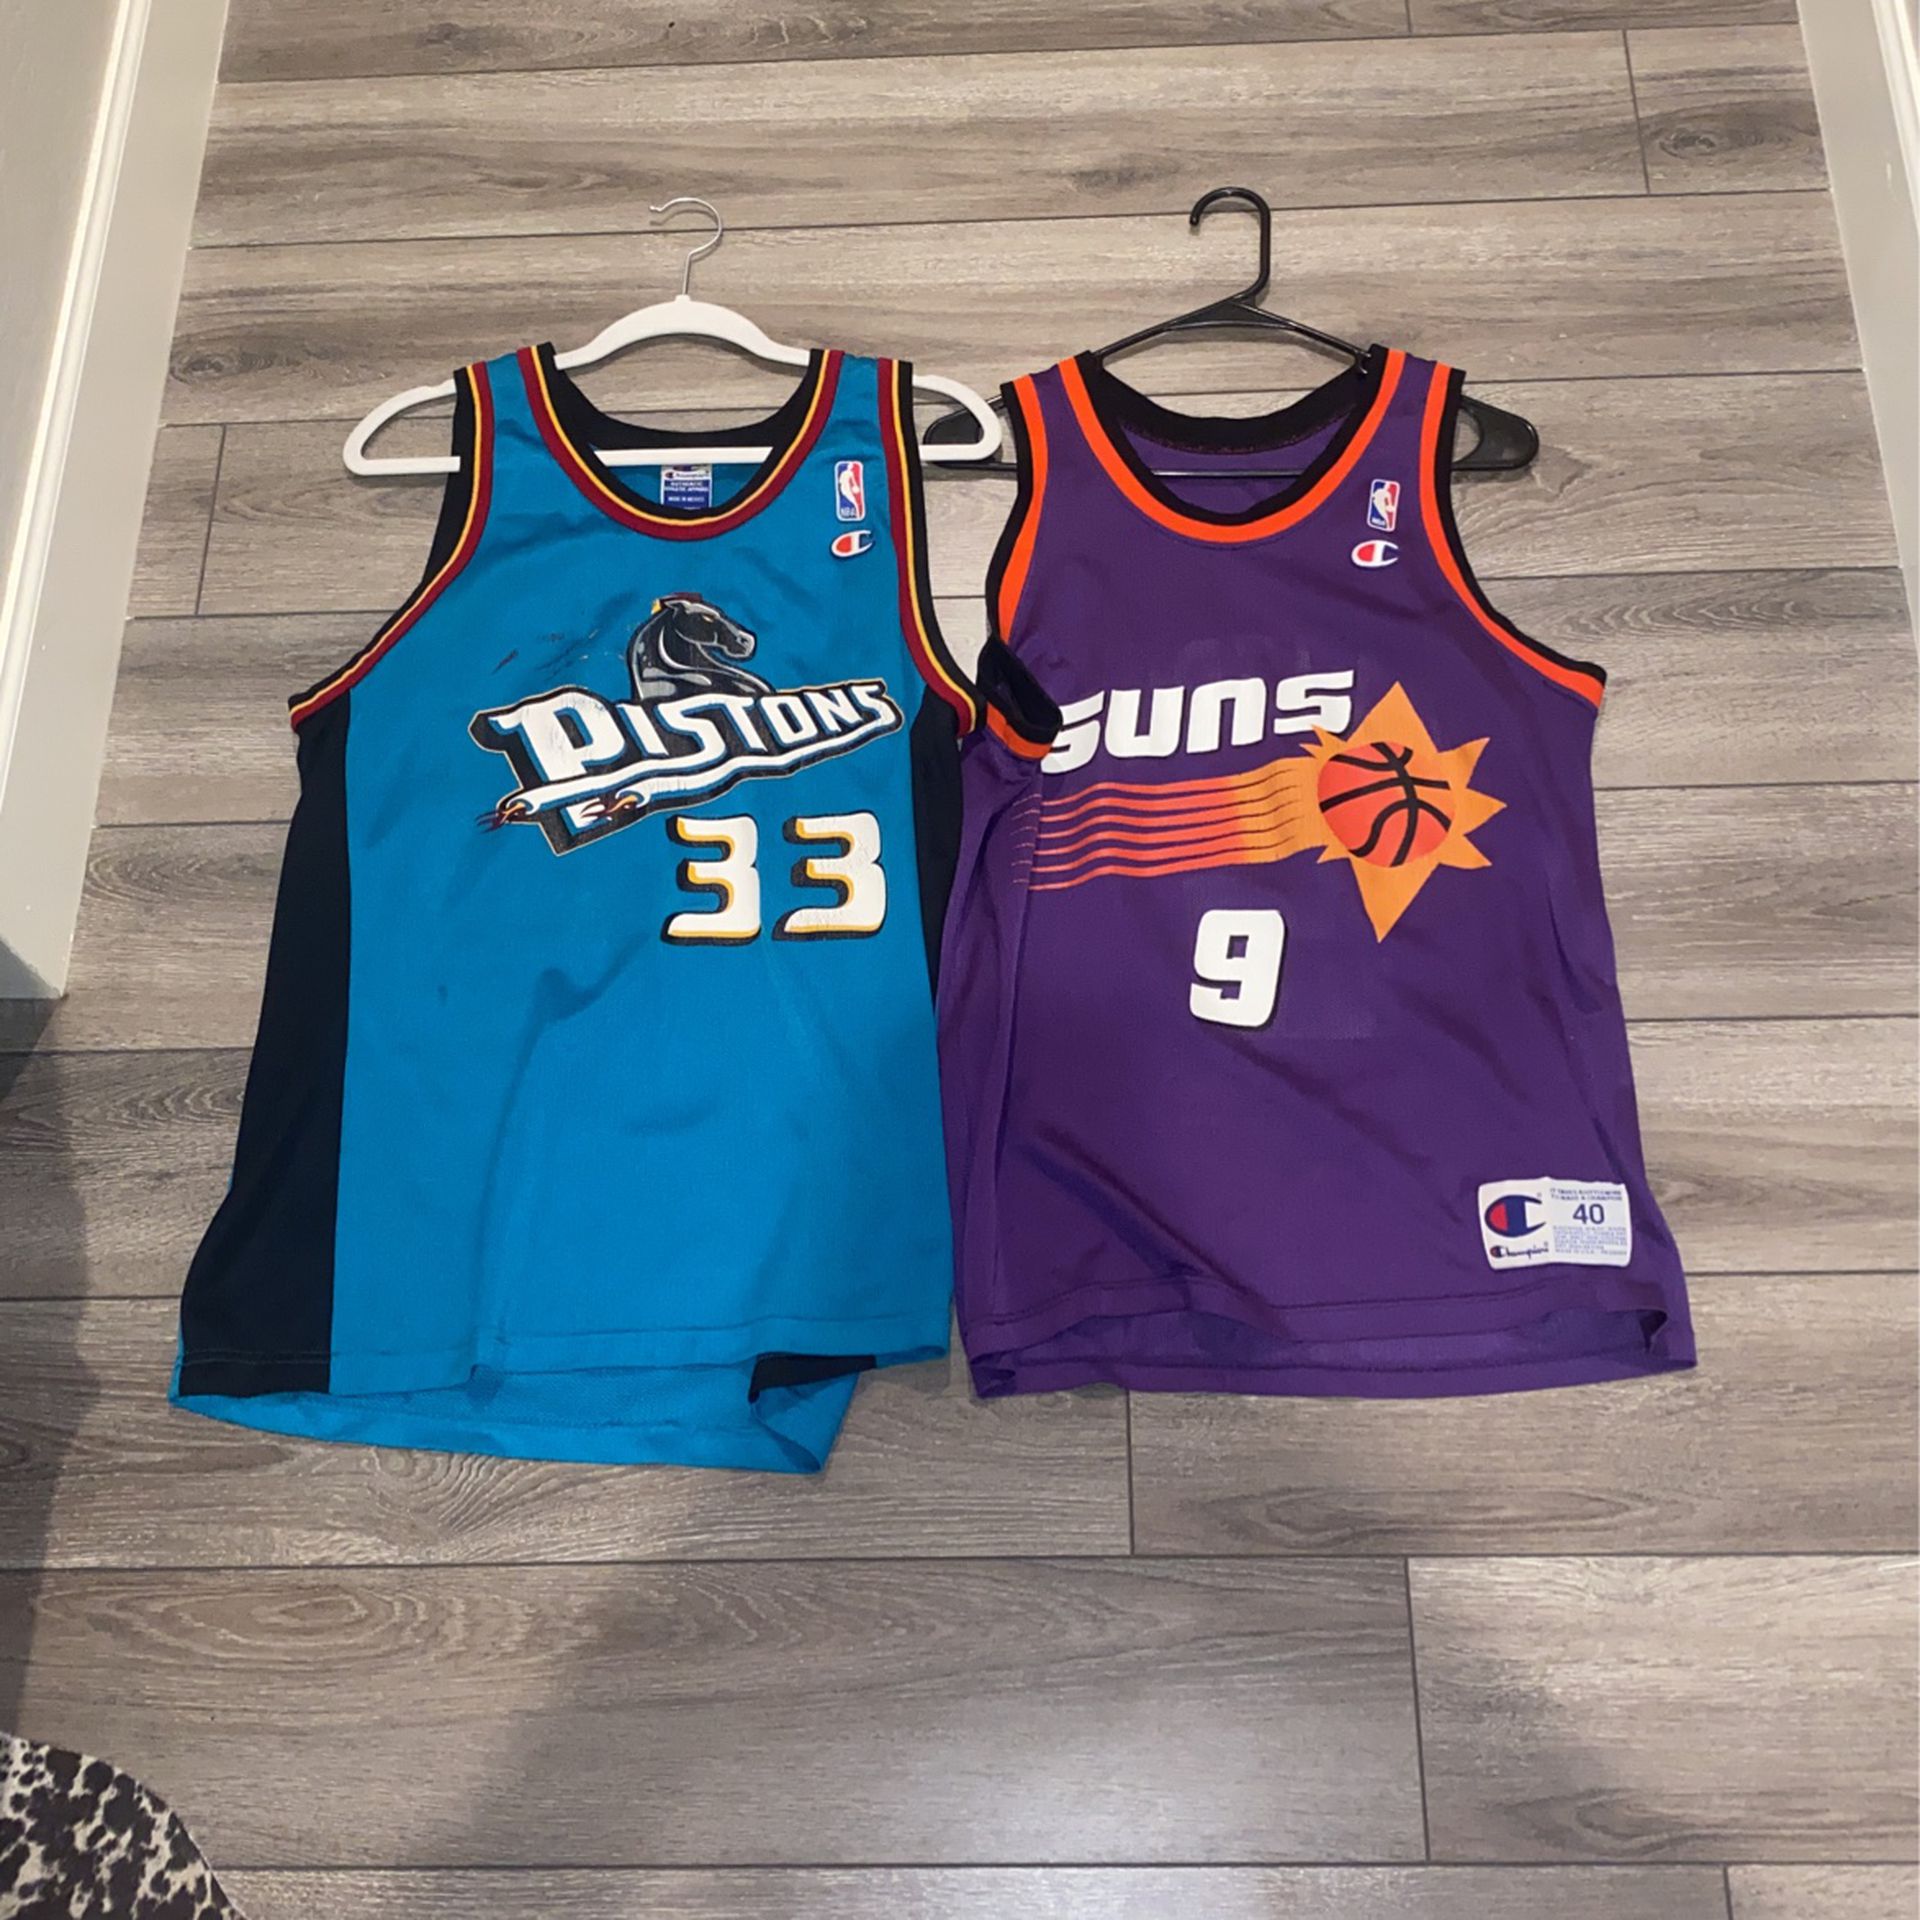 Vintage Champion Jerseys (suns And Pistons) Size 40 for Sale in Mesa, AZ -  OfferUp